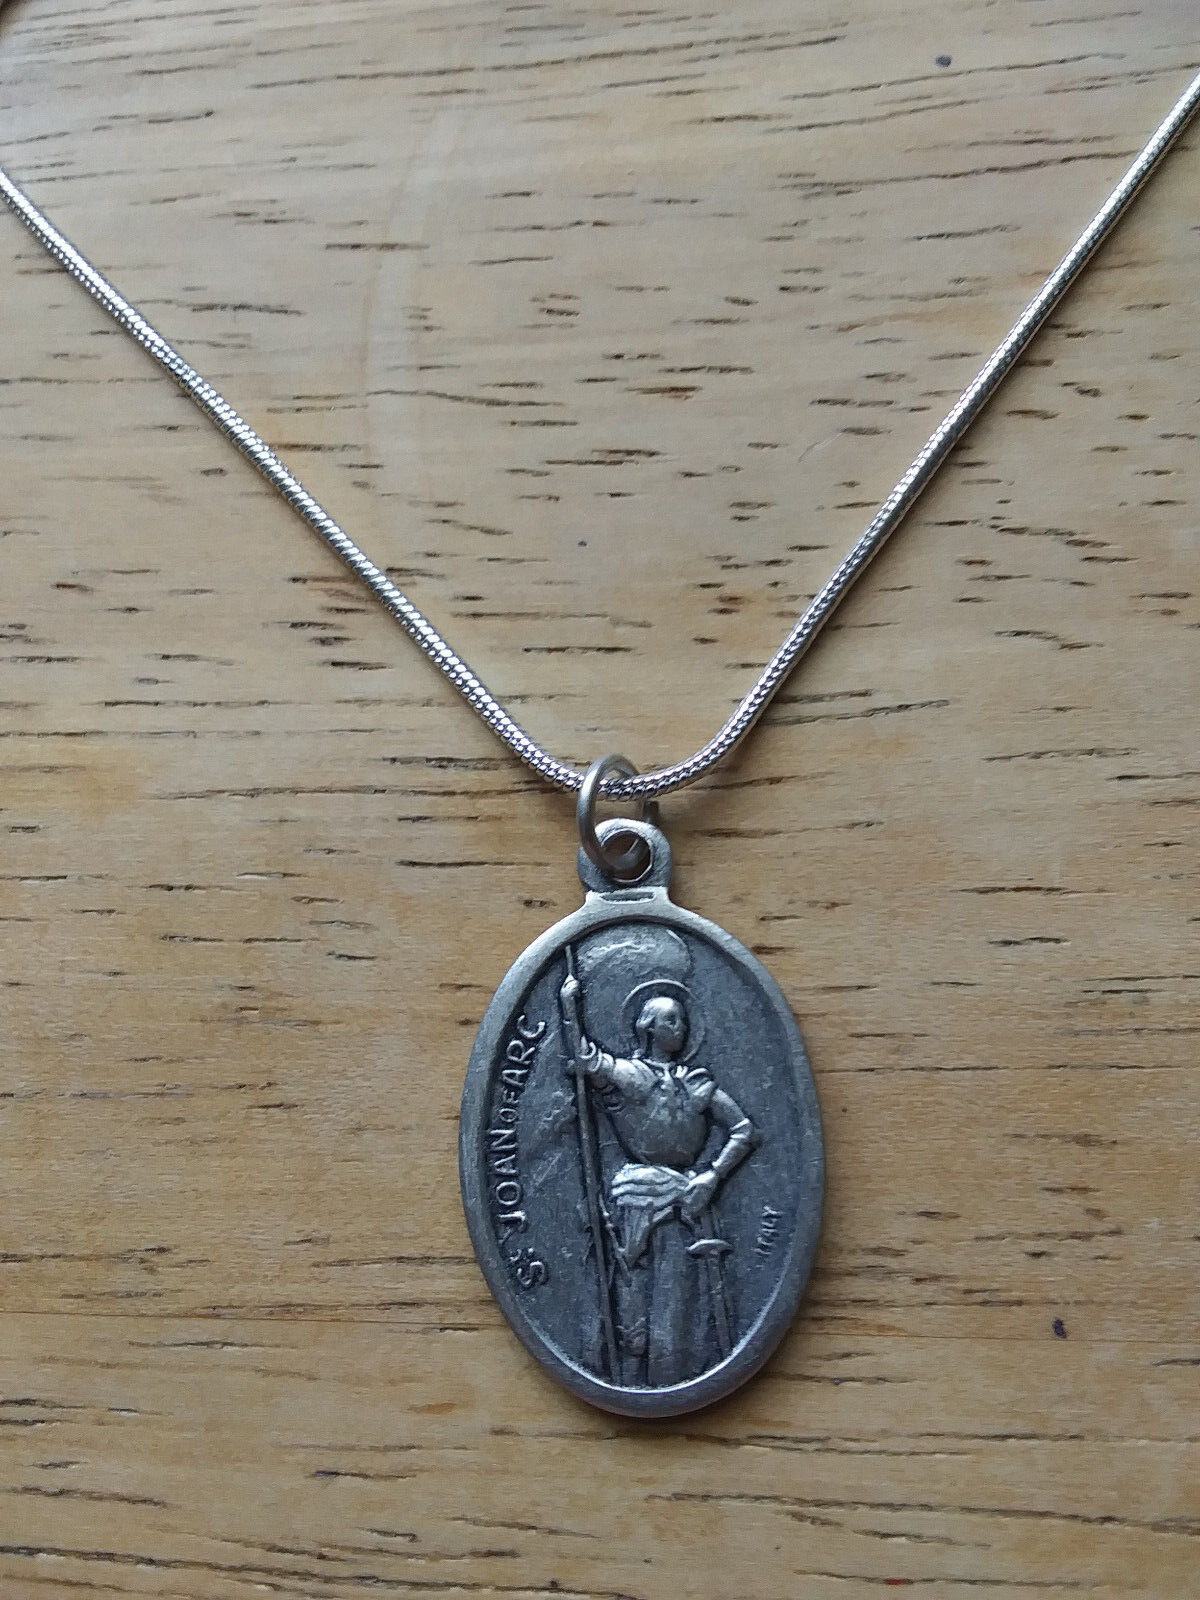 St Joan of Arc Pray for Us Medal necklace 925 sterling silver chain+ prayer card